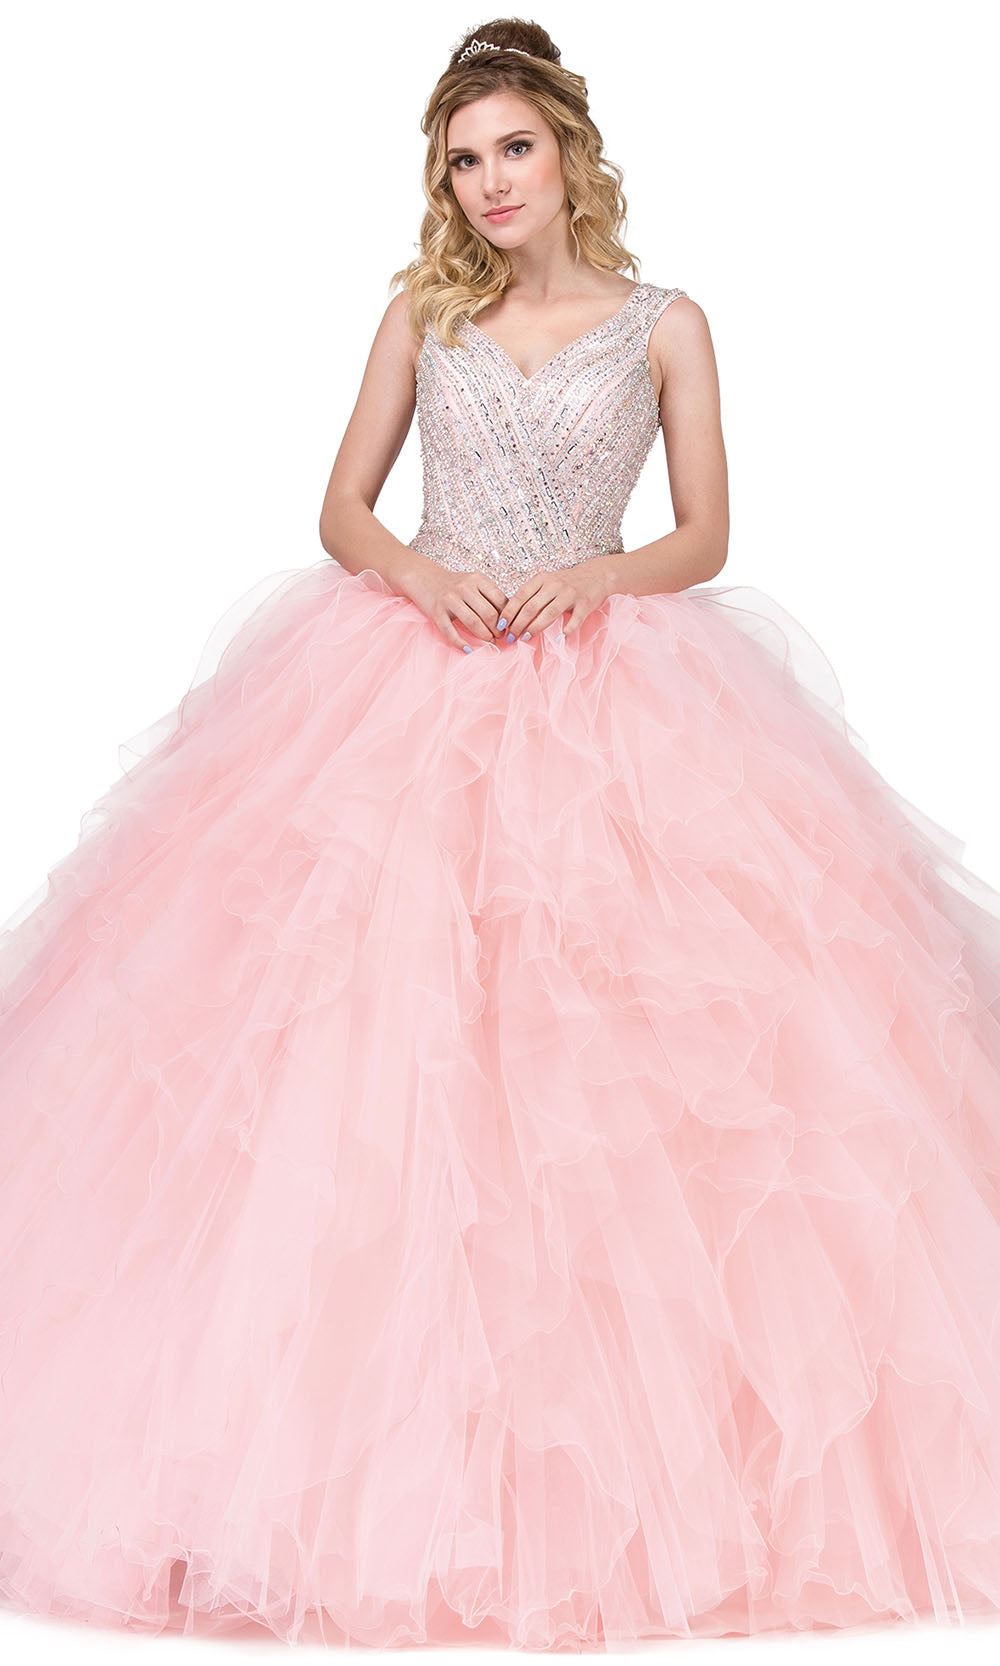 Dancing Queen - 1273 Embellished V Neck Ruffled Ballgown In Pink